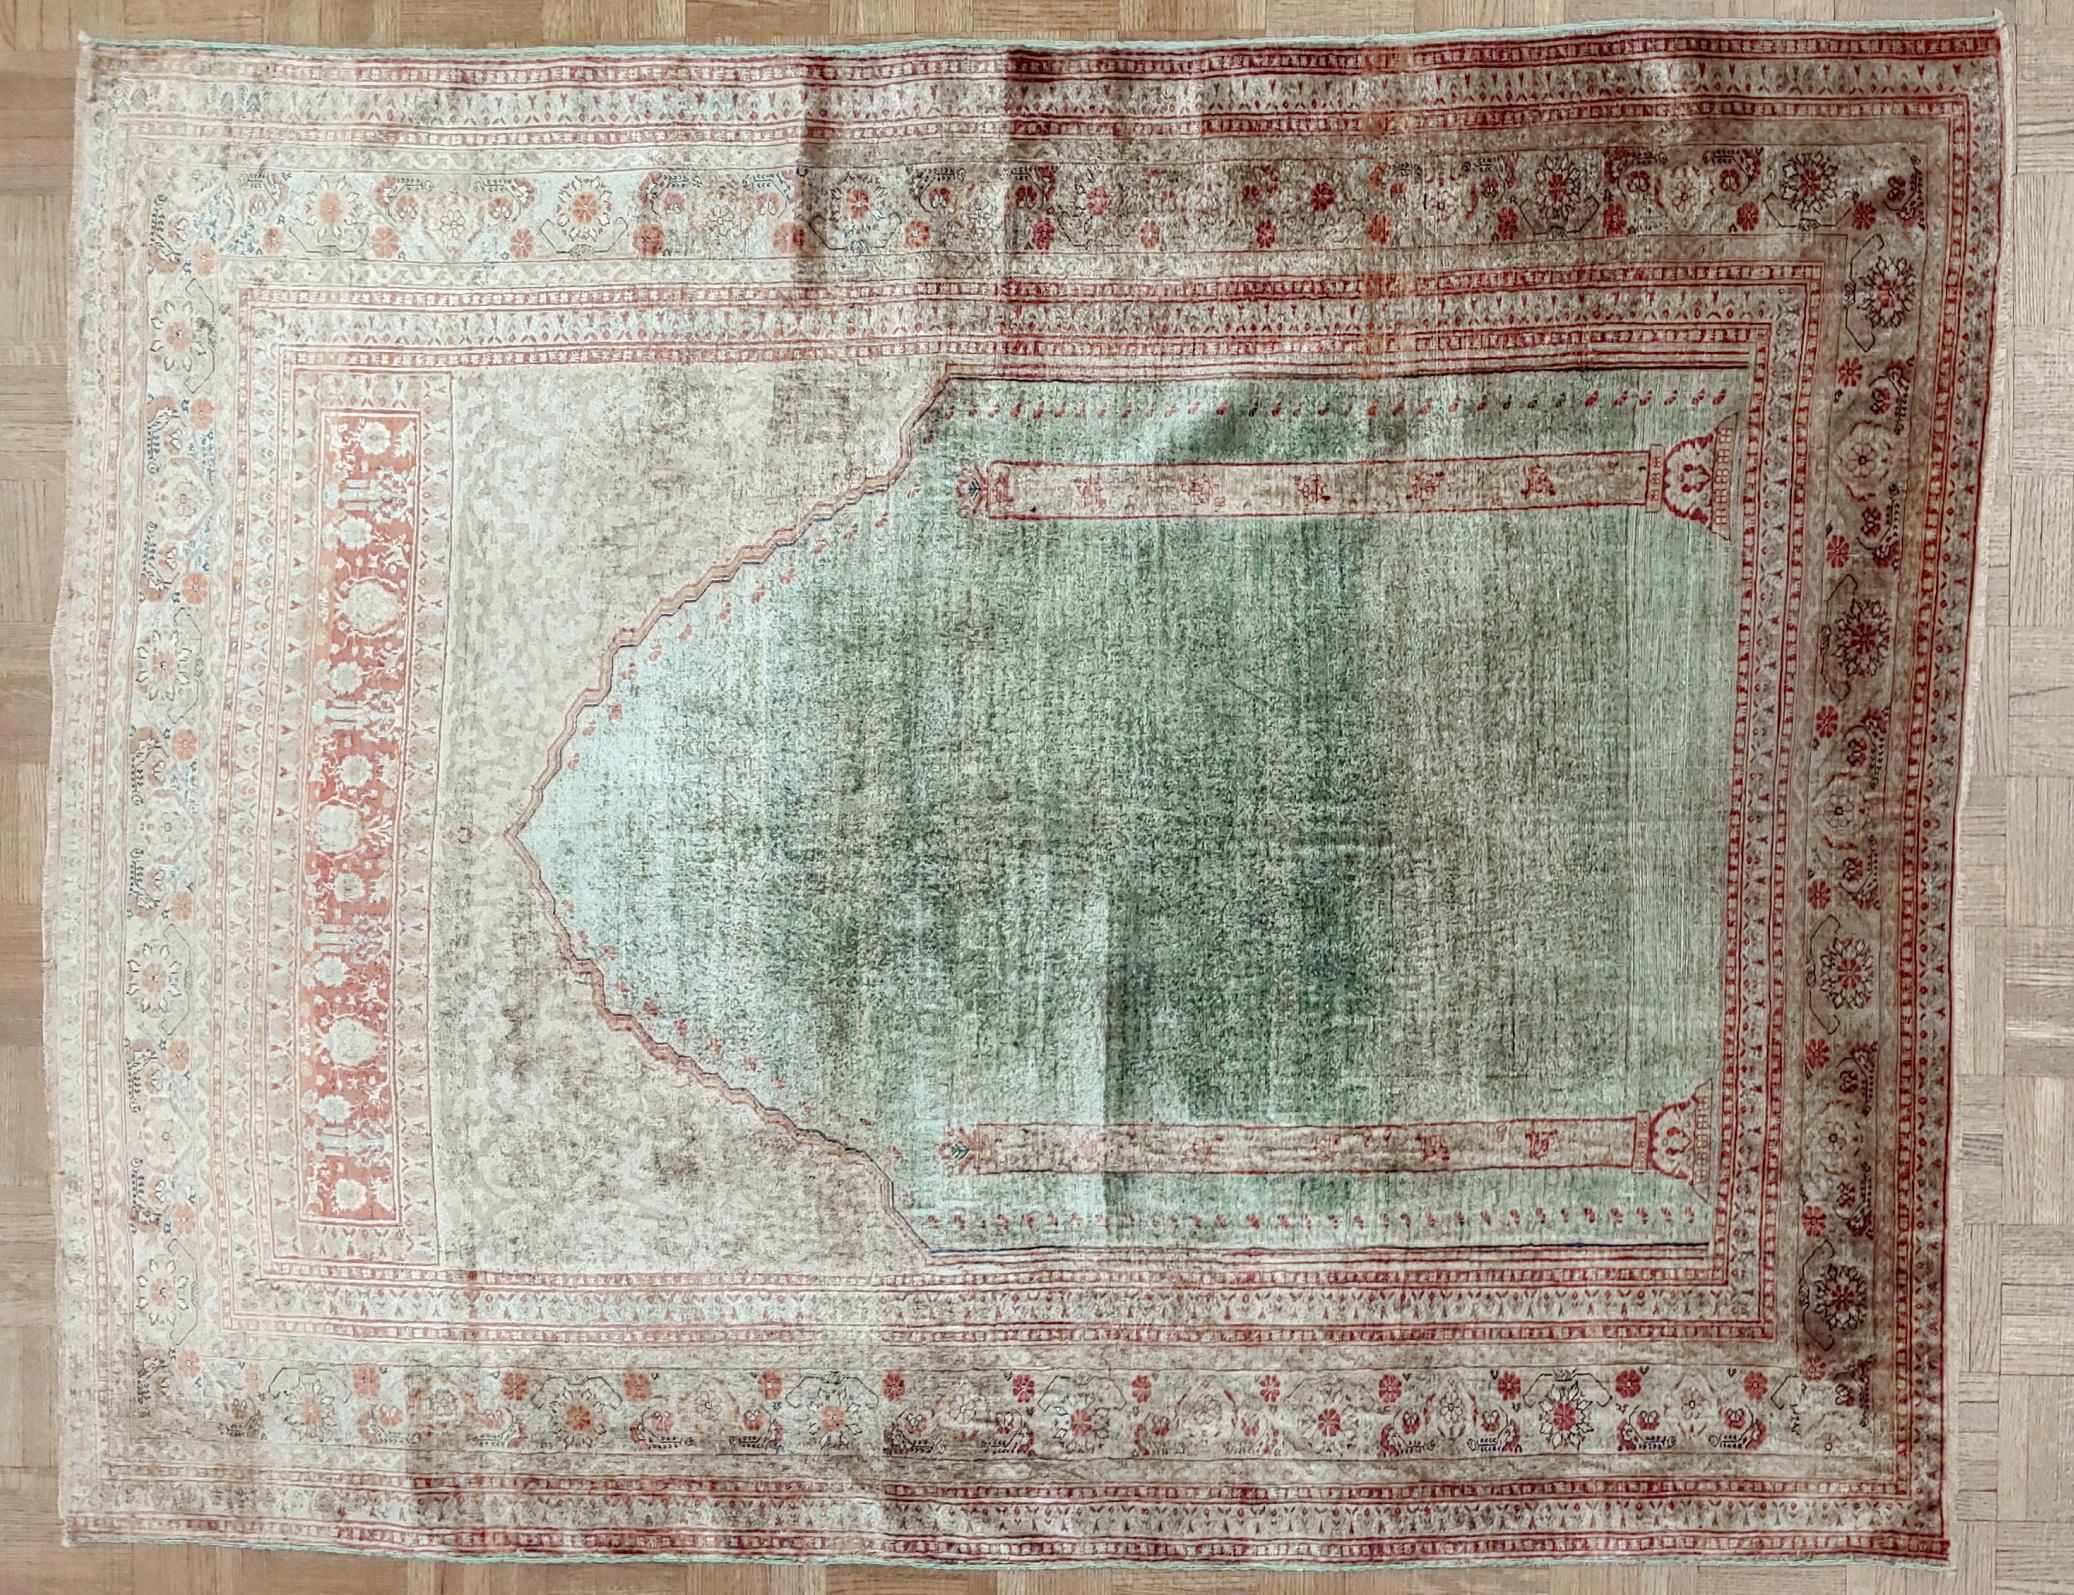 Very rare antique Turkish Silk Ghiordes rug with a prayer design. This rug dates mid-19th century. The field is aqua and there is a lot of terracotta in the border and mihrab. There are about 800 knots per square inch. The pile is a little low in